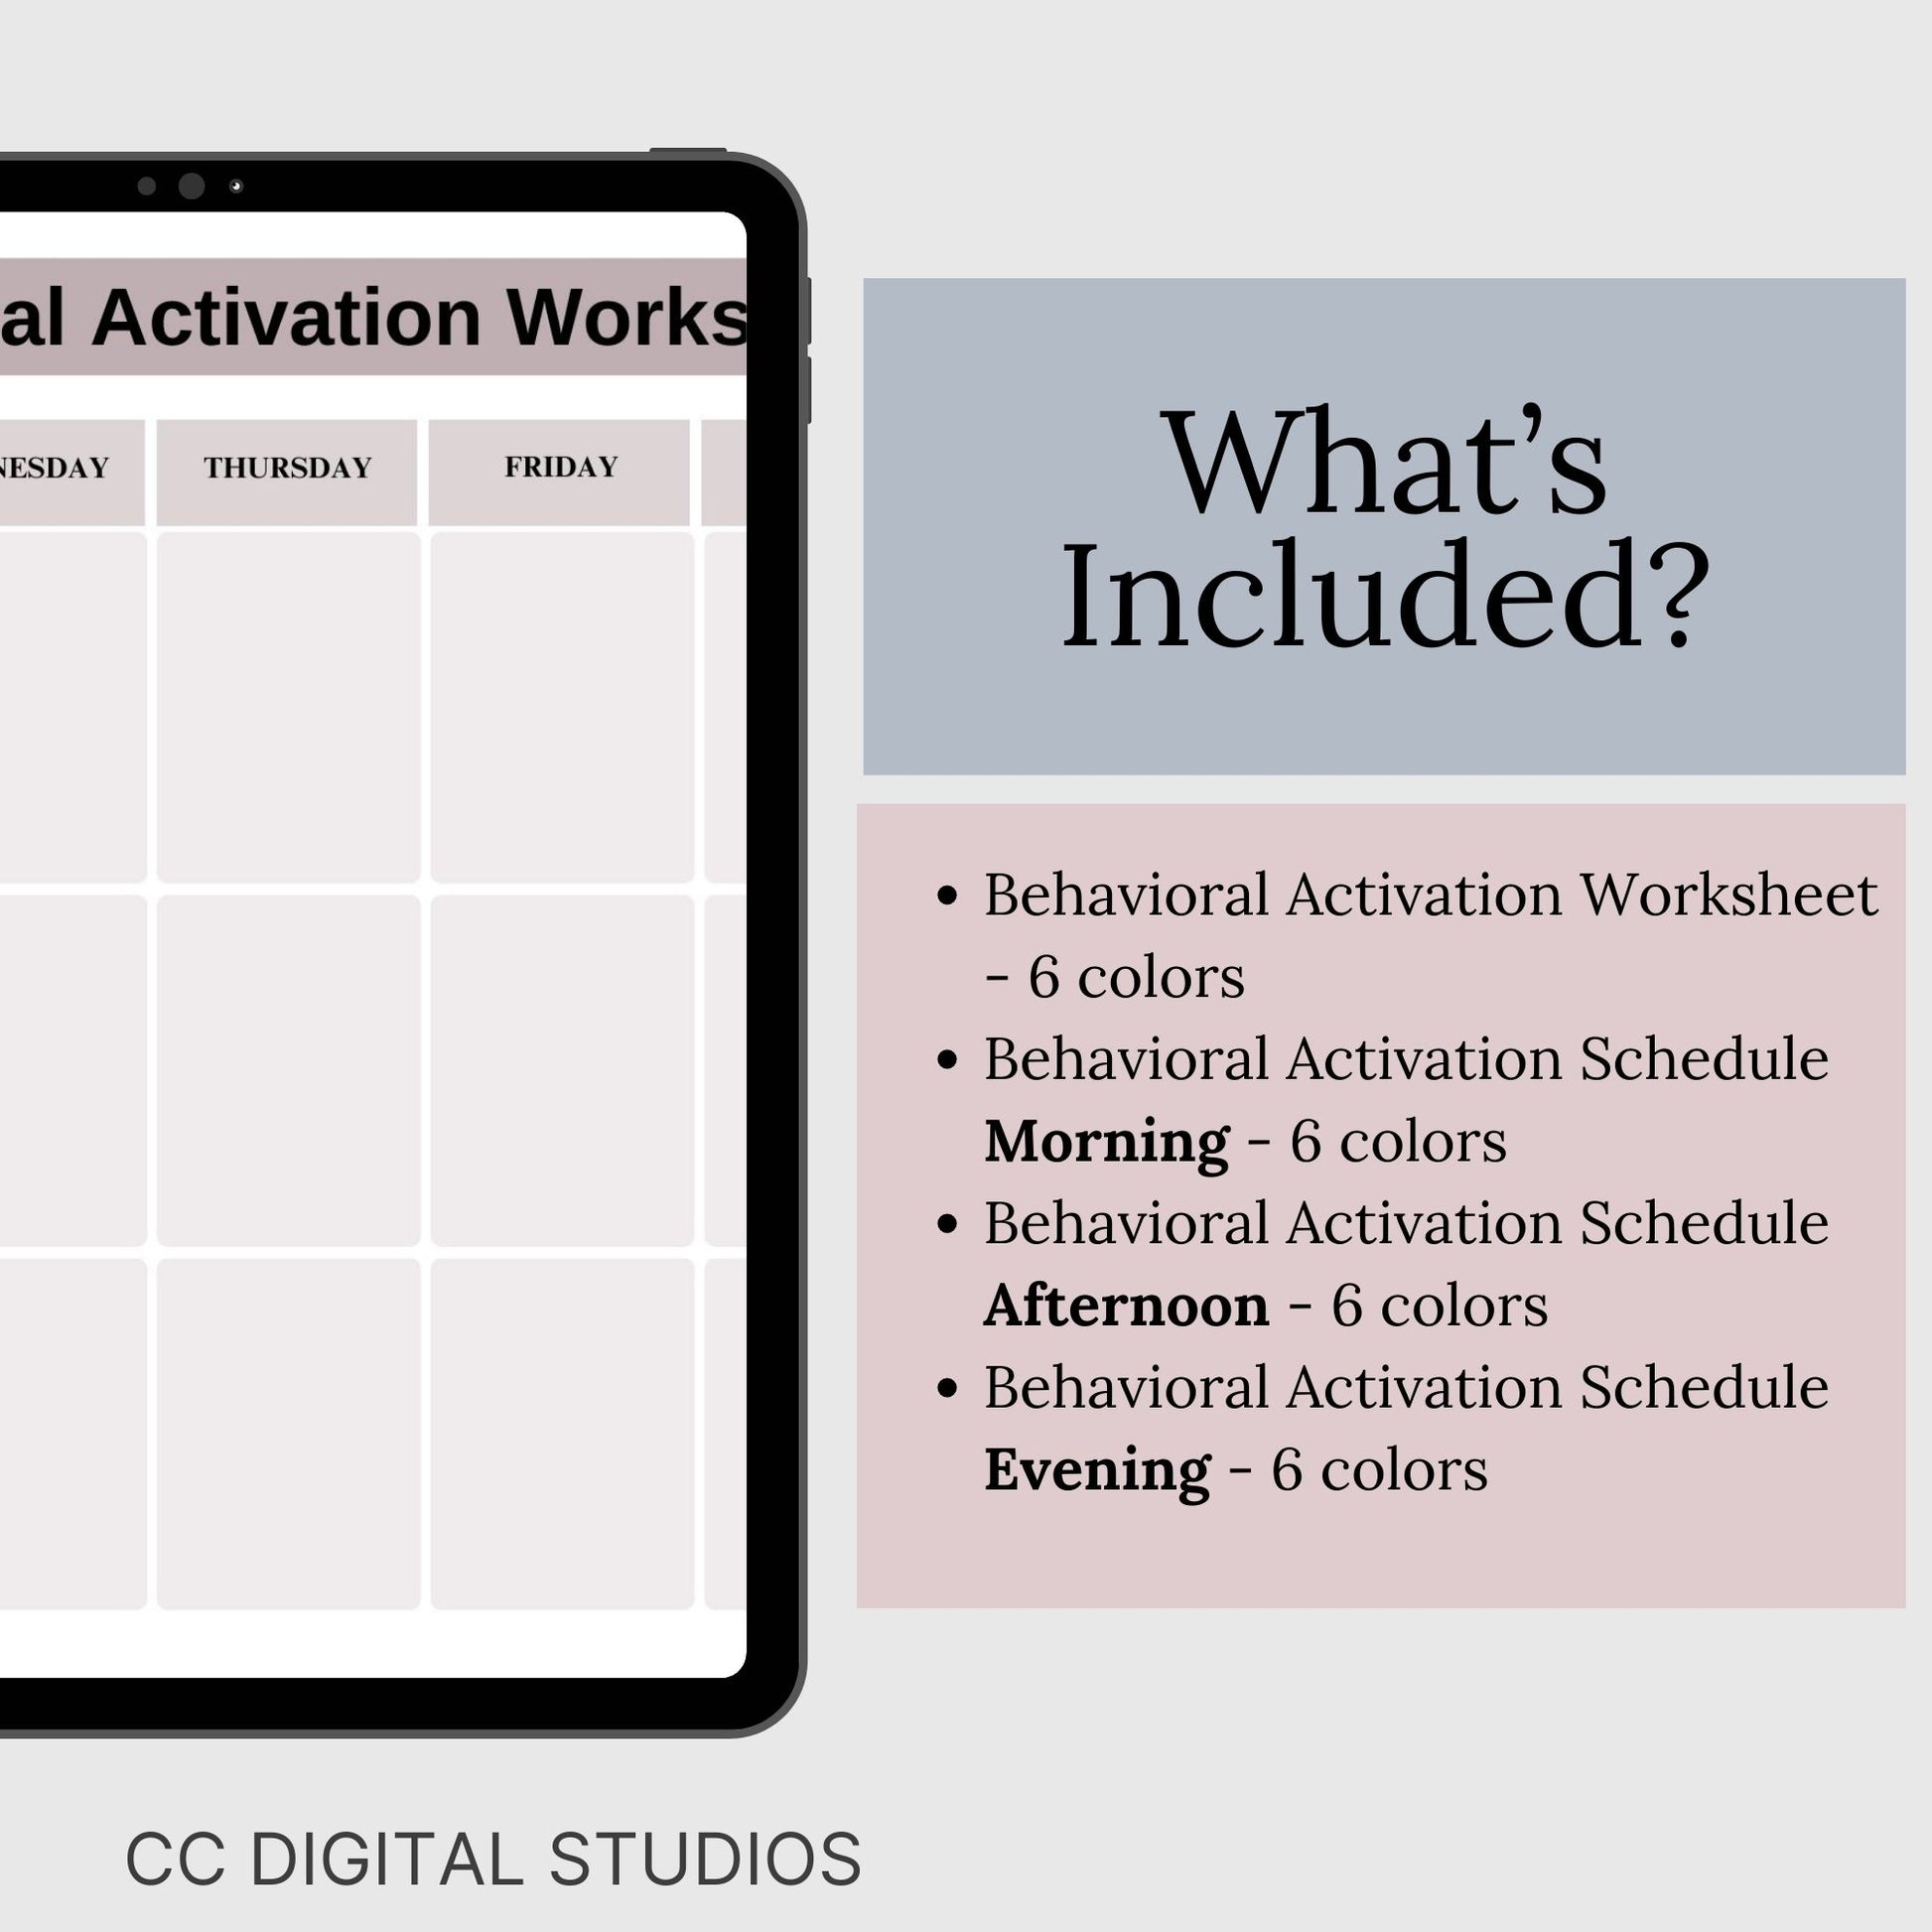 CBT Worksheets for Behavioral Activation a effective therapy resource. These worksheets can be added to your mental health workbook, designed for depression and anxiety relief, provides a structured approach for purposeful daily activities.